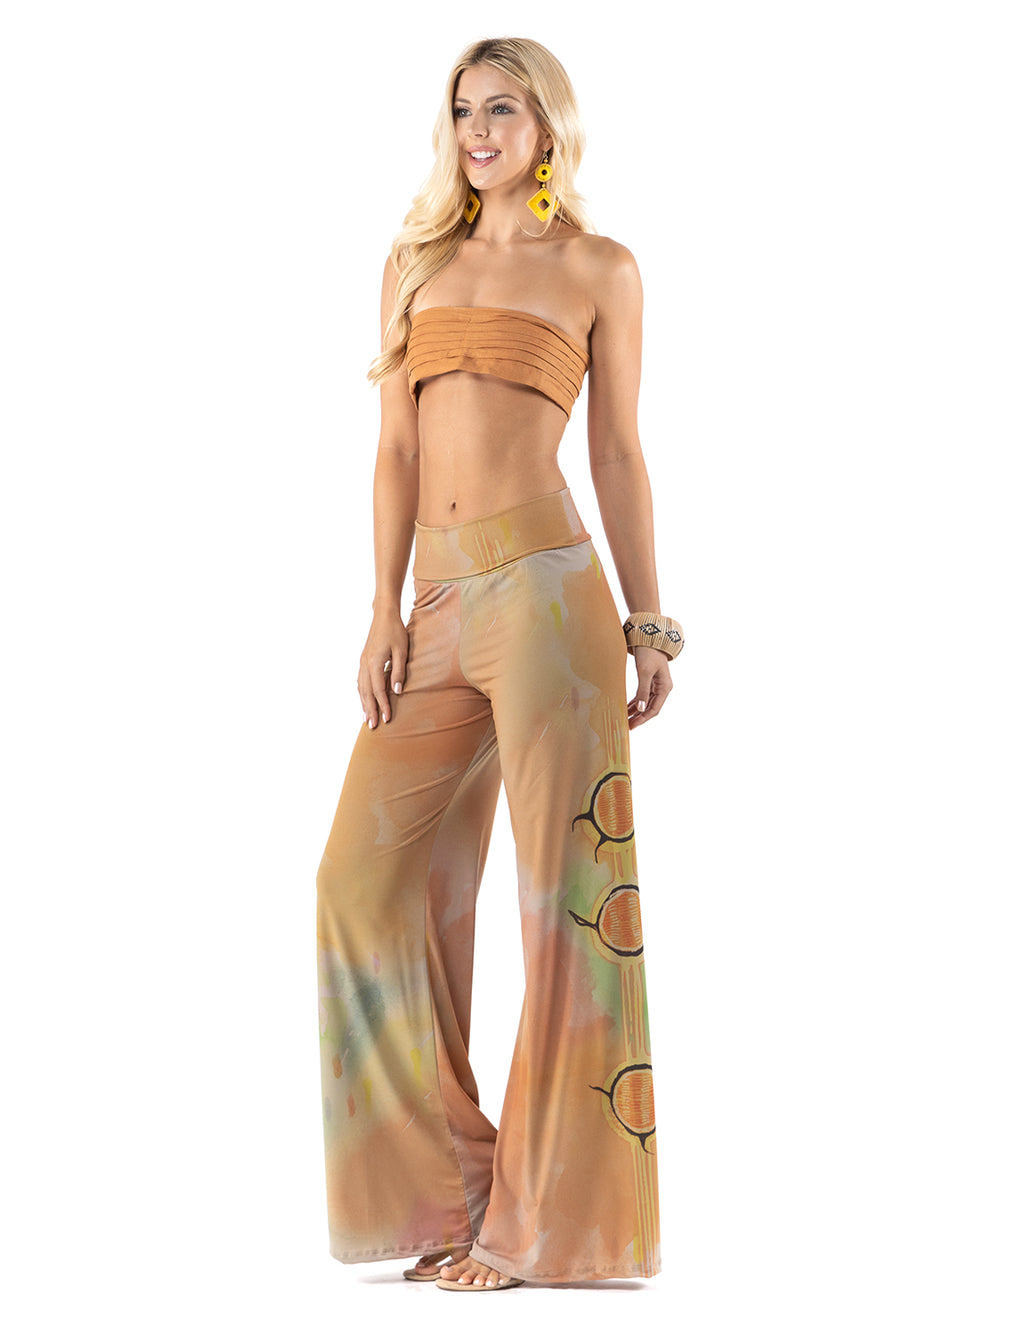 Yellow Watercolor Sun High waist palazzo pants featuring wide legs, and a comfortable stretchy fabric Perfect during spring, summer,Concerts, Festivals, Dance, Brunch